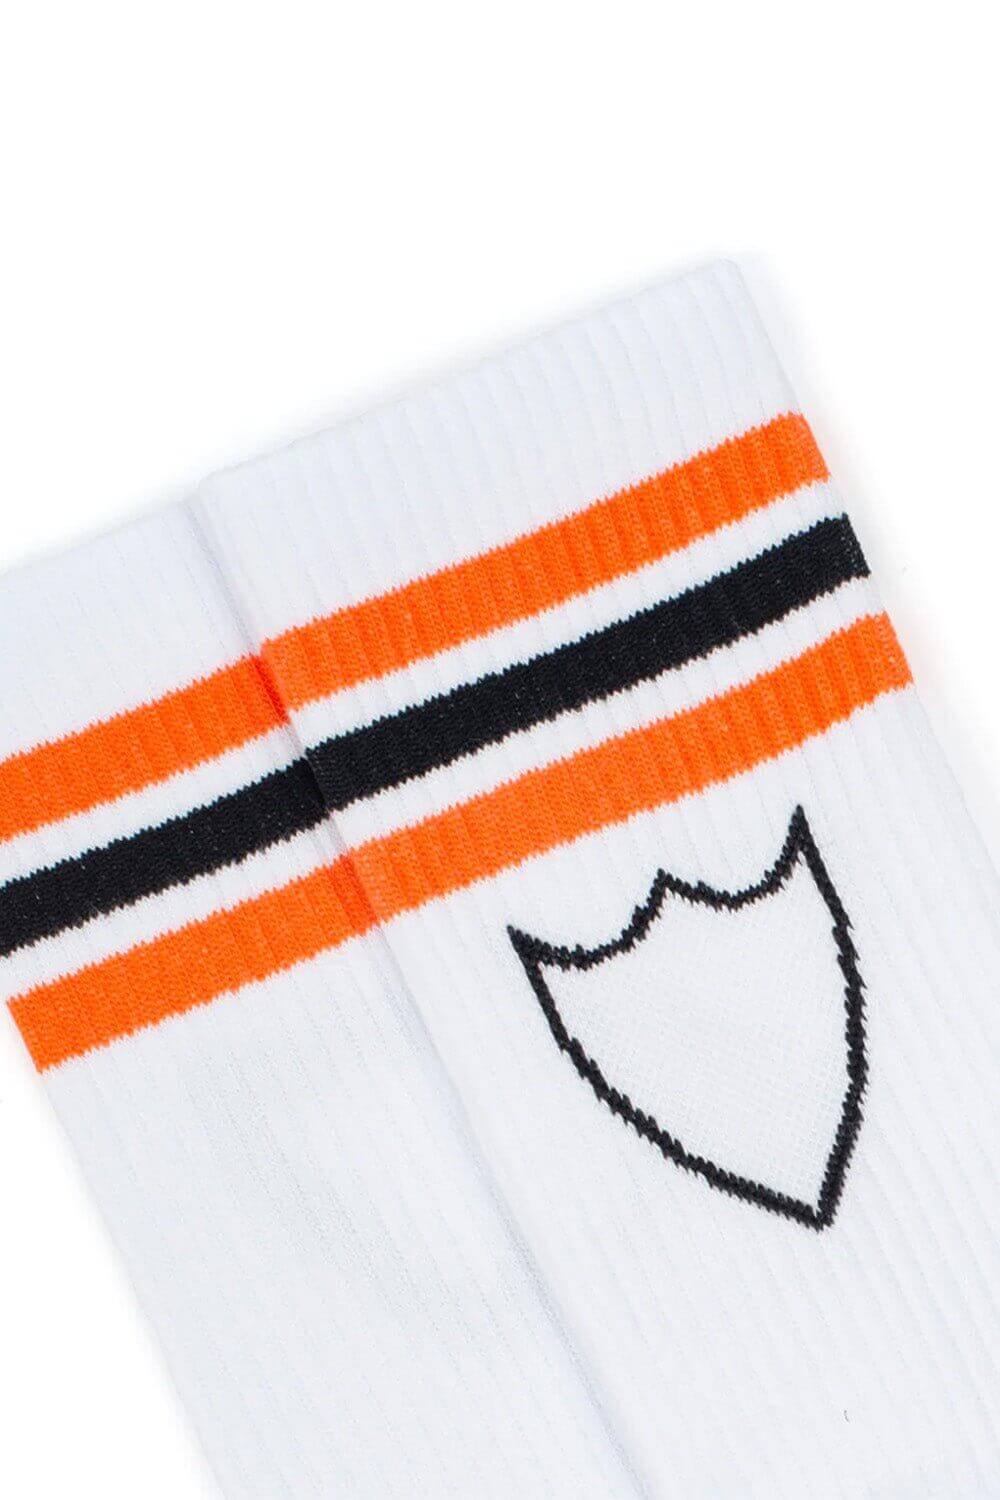 HTC STRIPES WOMAN SOCKS Signature woman socks with HTC shield logo. 85% Cotton 10% Polyamide 5% Elastane. Made in Italy HTC LOS ANGELES